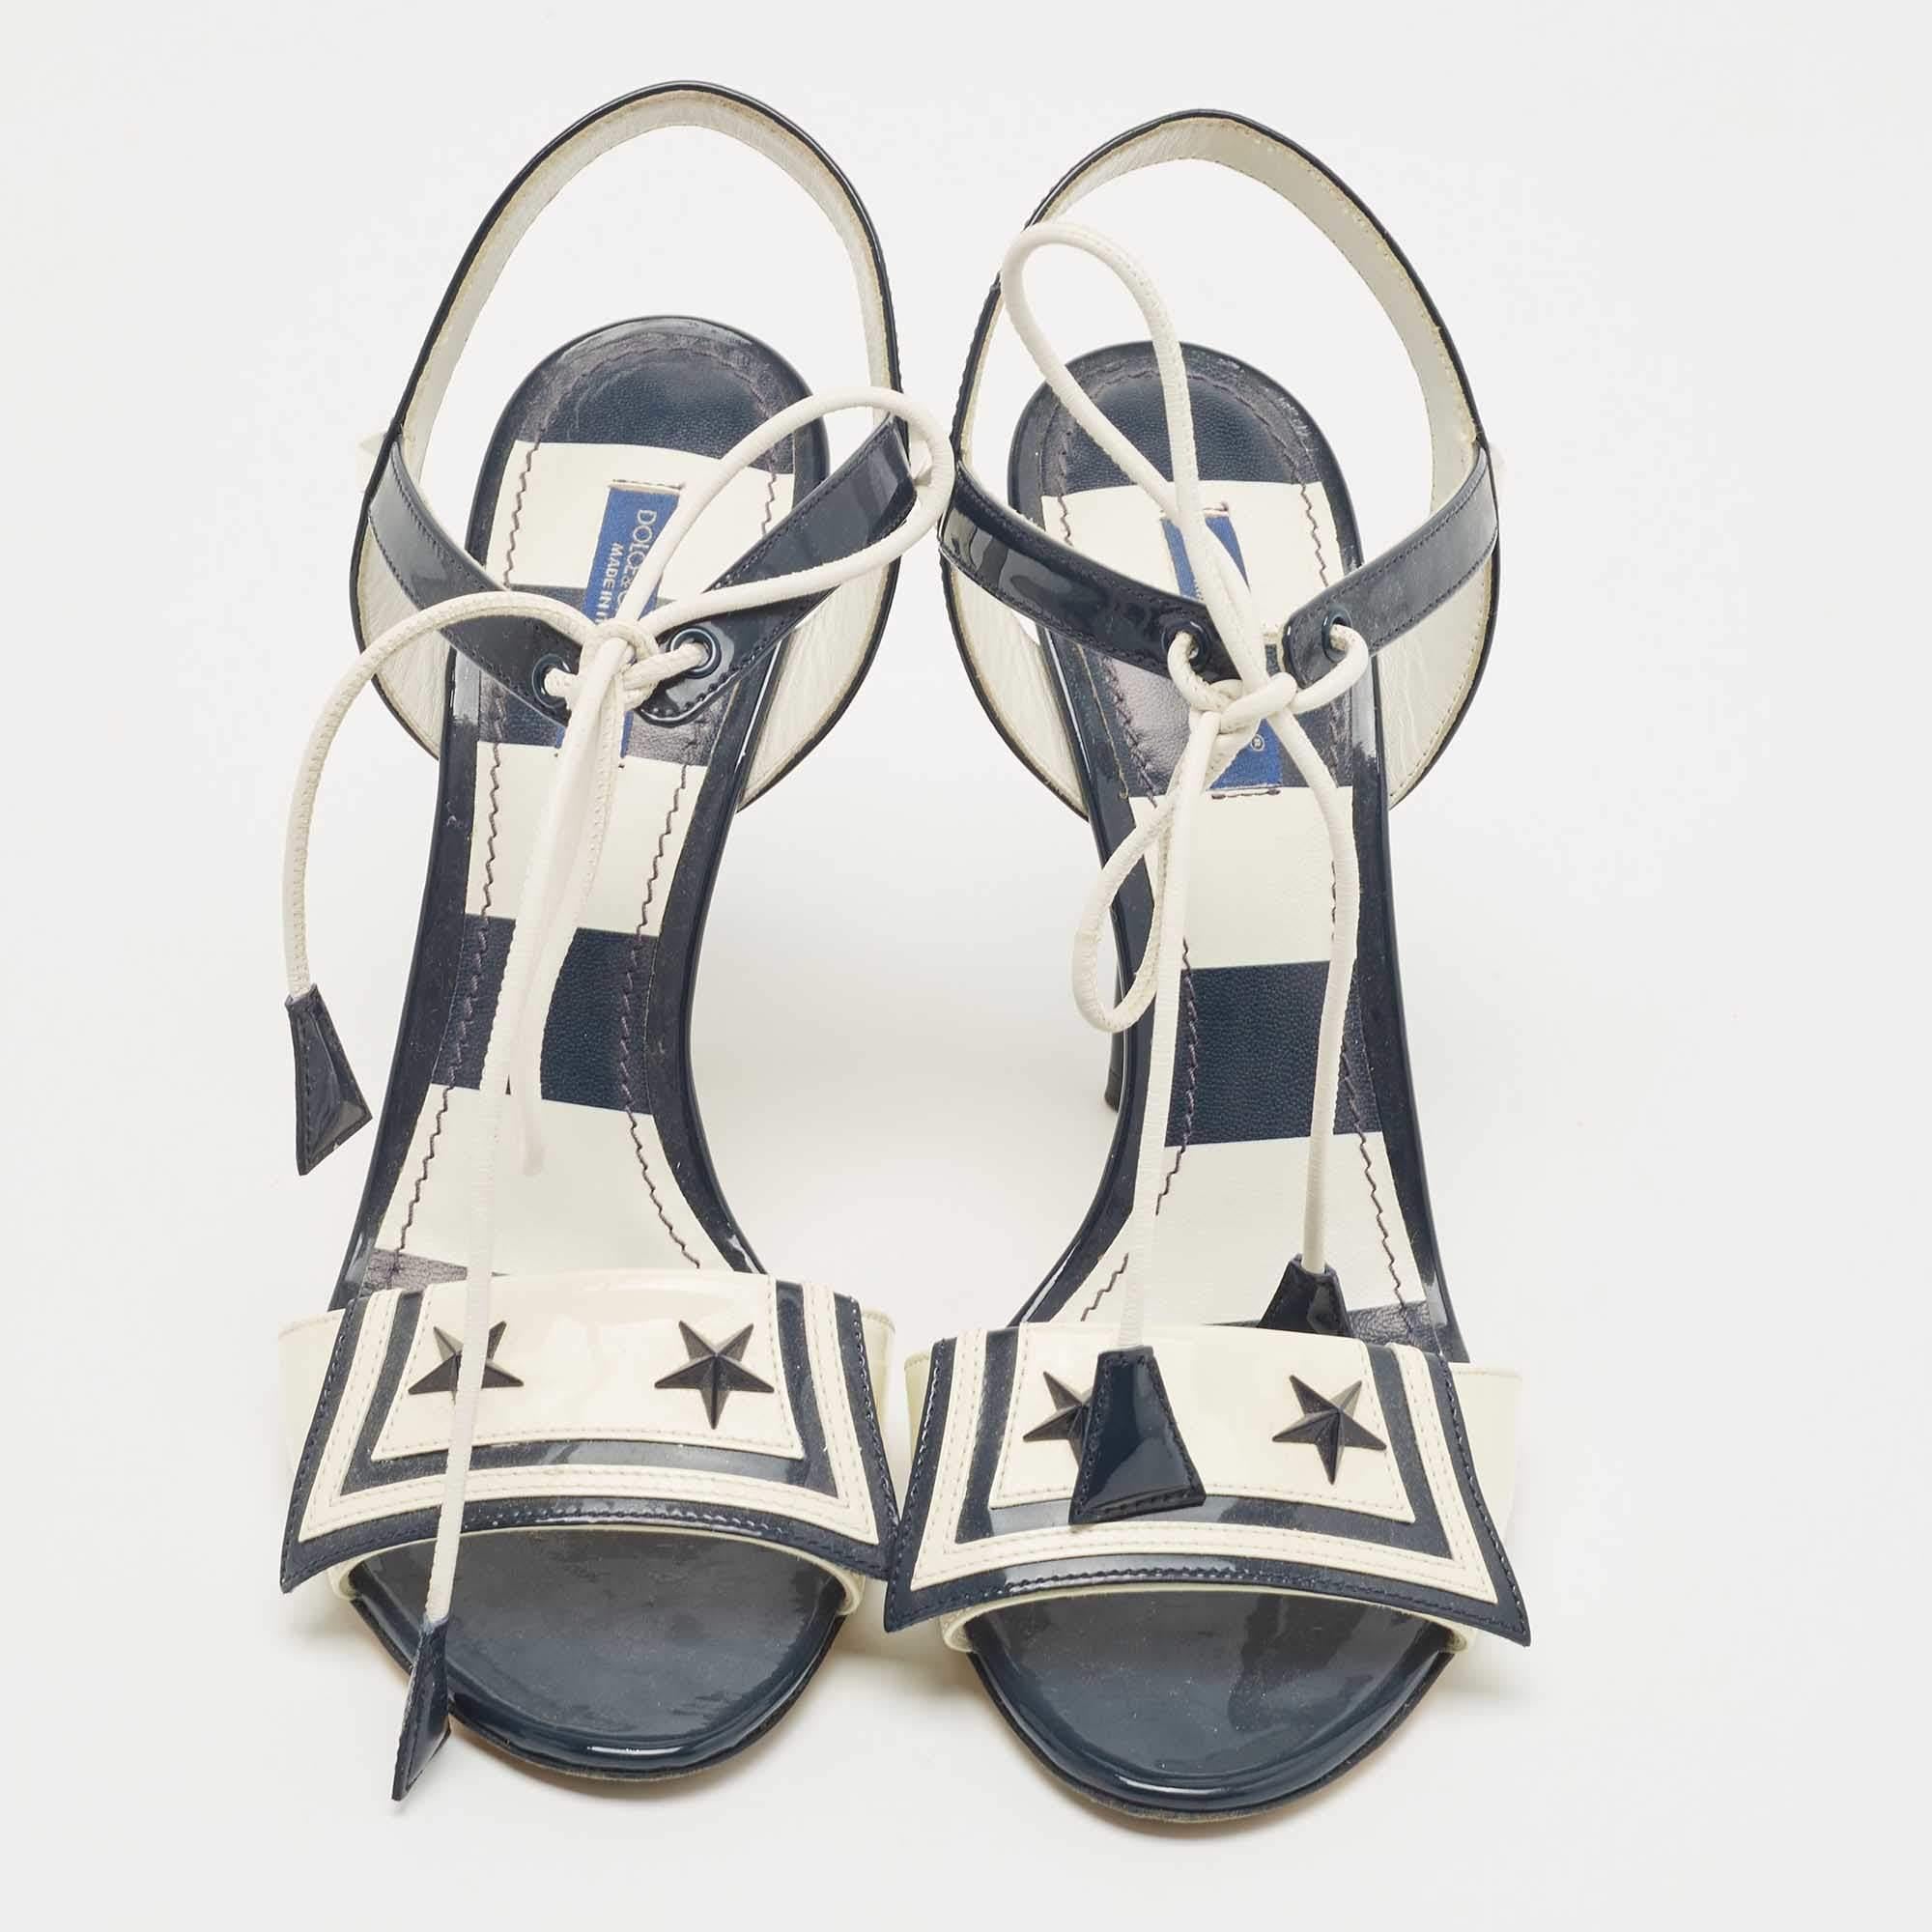 Women's Dolce & Gabbana Navy Blue/Off White Patent Leather Ankle Tie Sandals Size 38